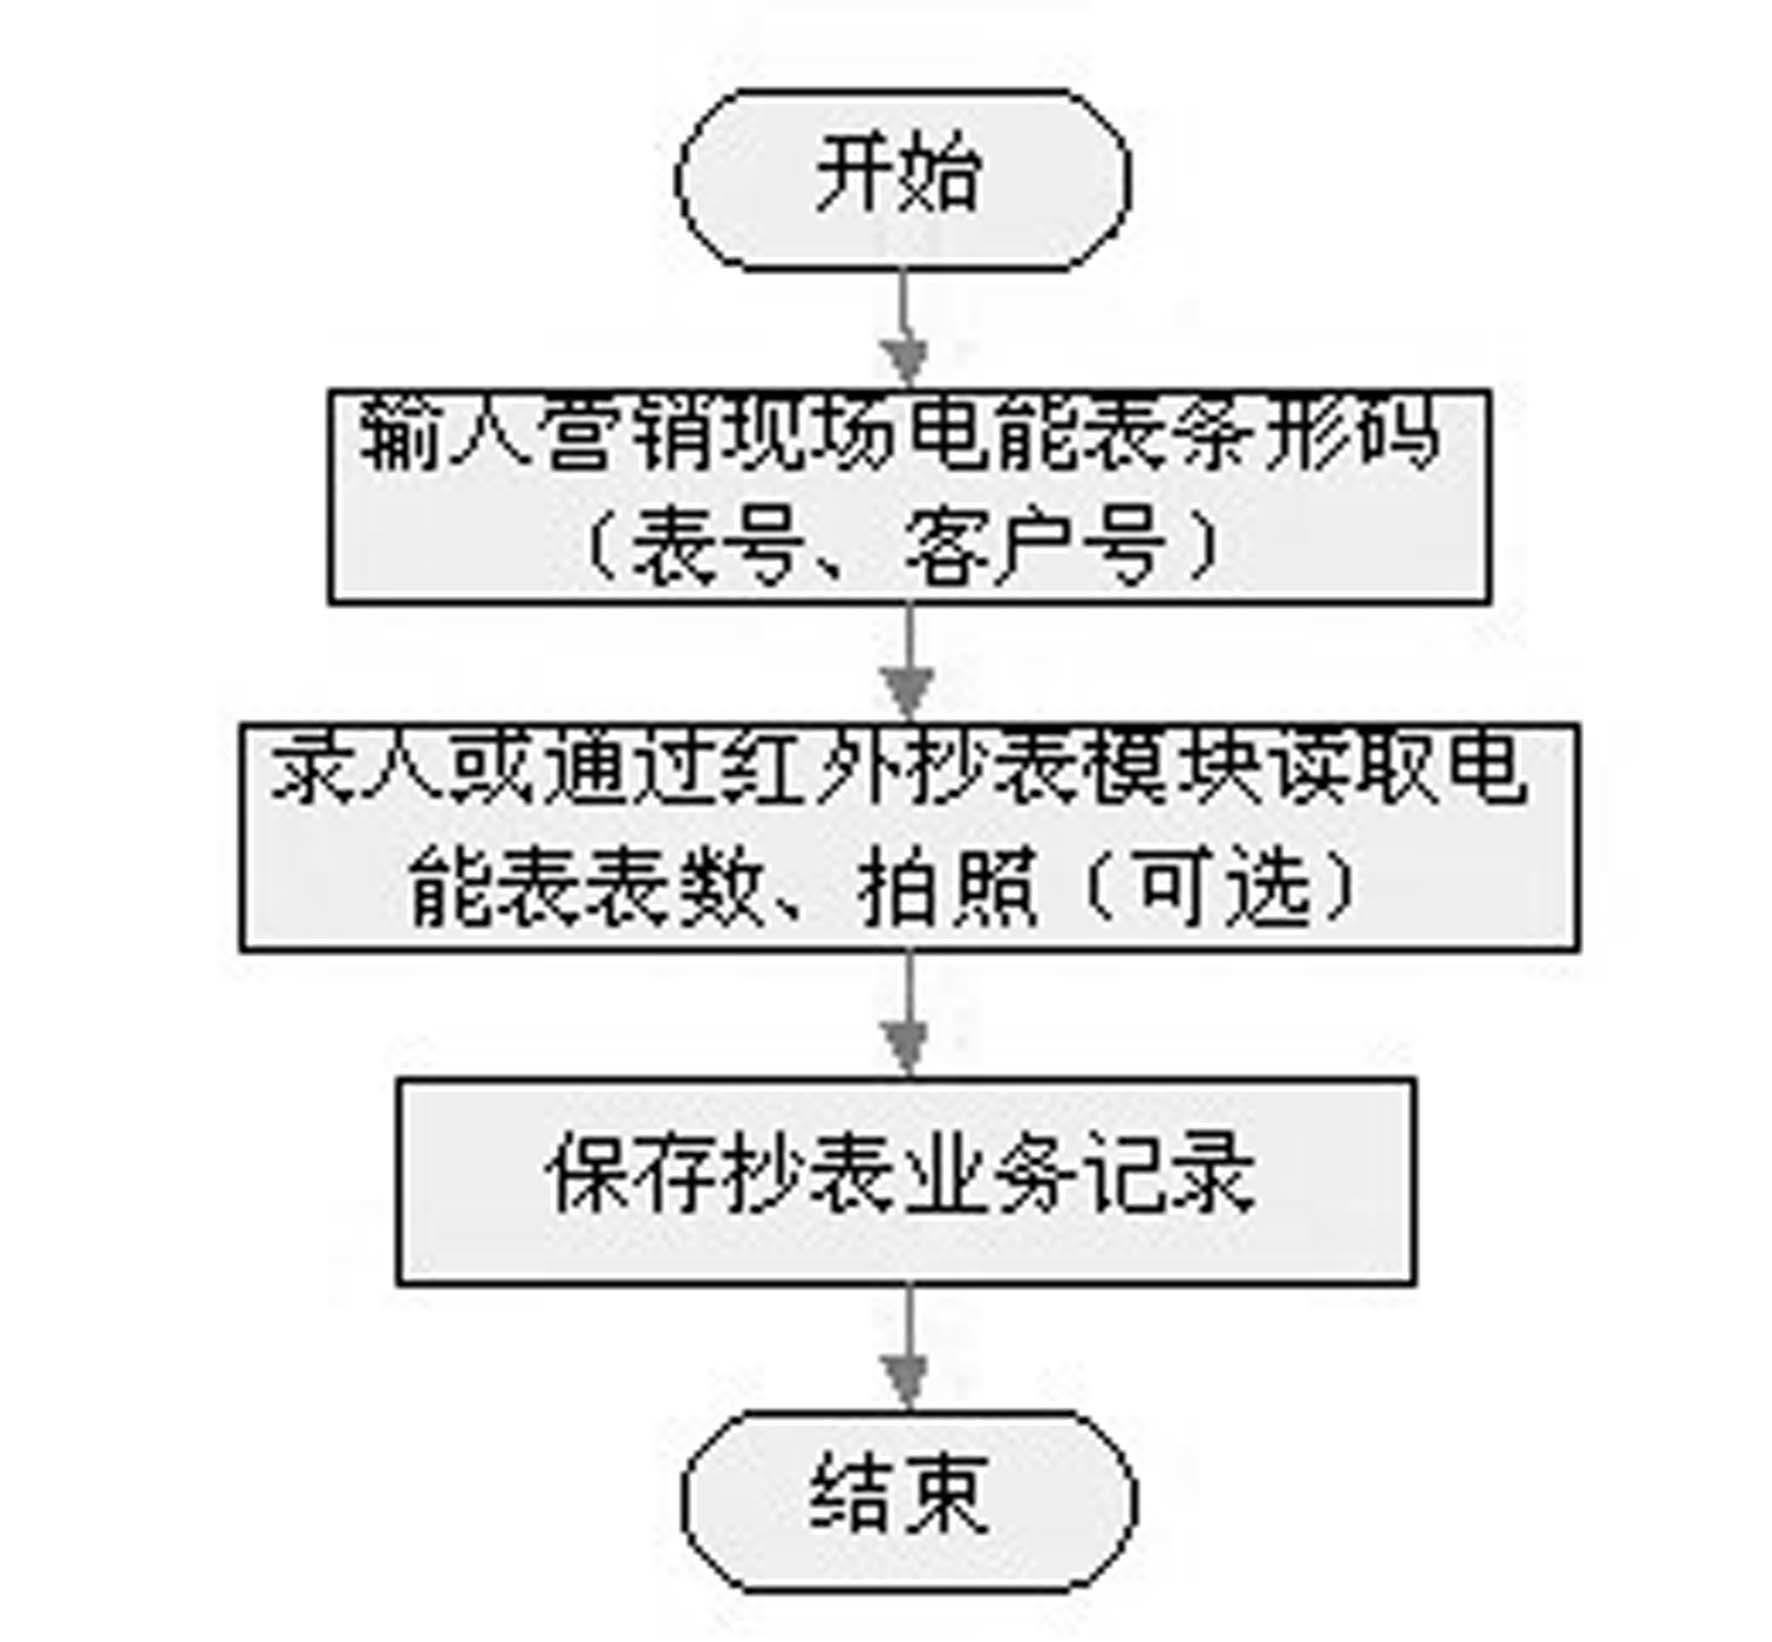 Method for processing flow and standard of power-marketing site services on basis of handheld terminal